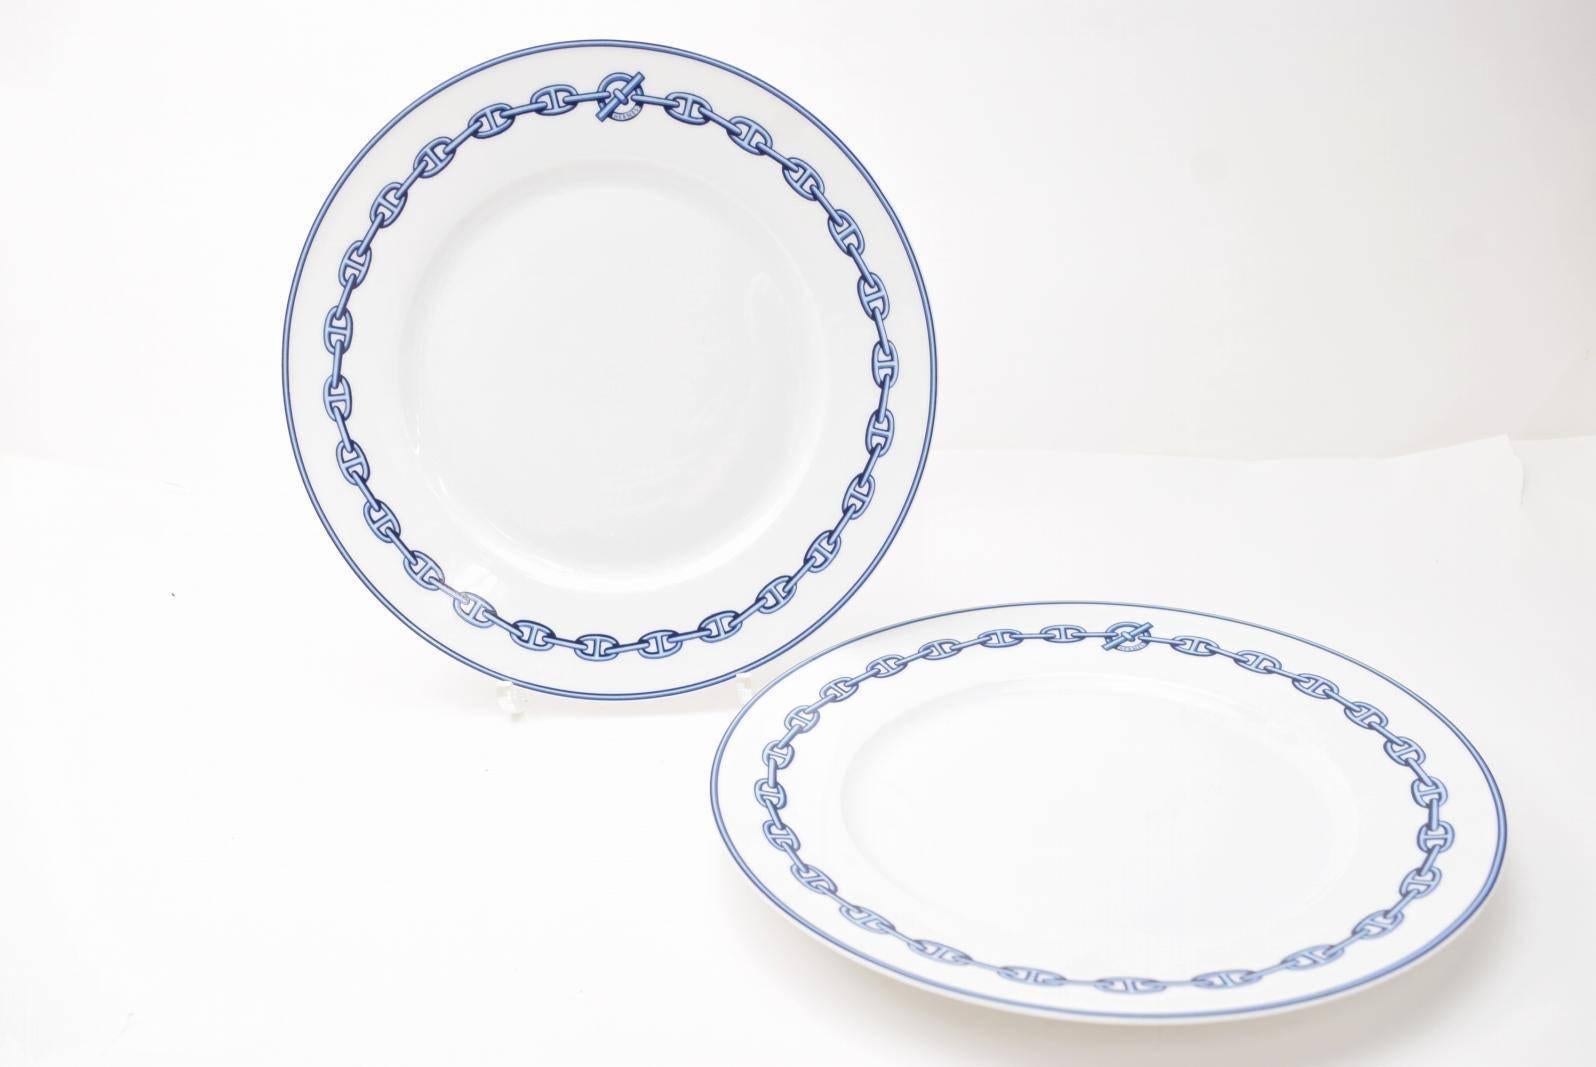 CURATOR'S NOTES  

Porcelain 
Made in France
Set includes two plates total 
Size measures ~10.8"
Includes original Hermes box